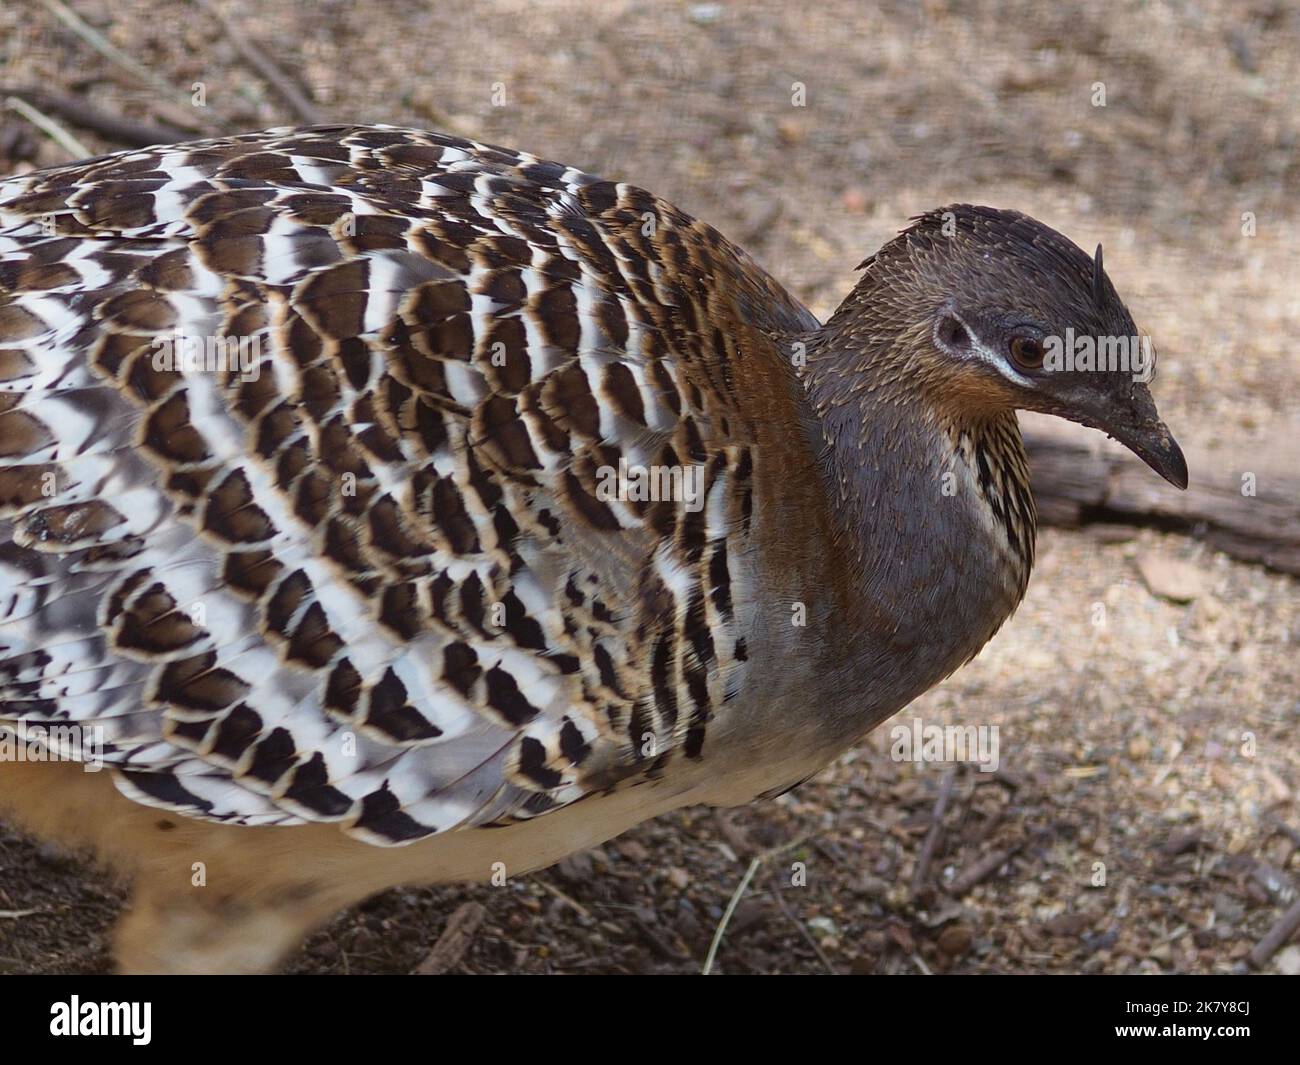 Hesitant wary Malleefowl with remarkable camouflaged plumage. Stock Photo